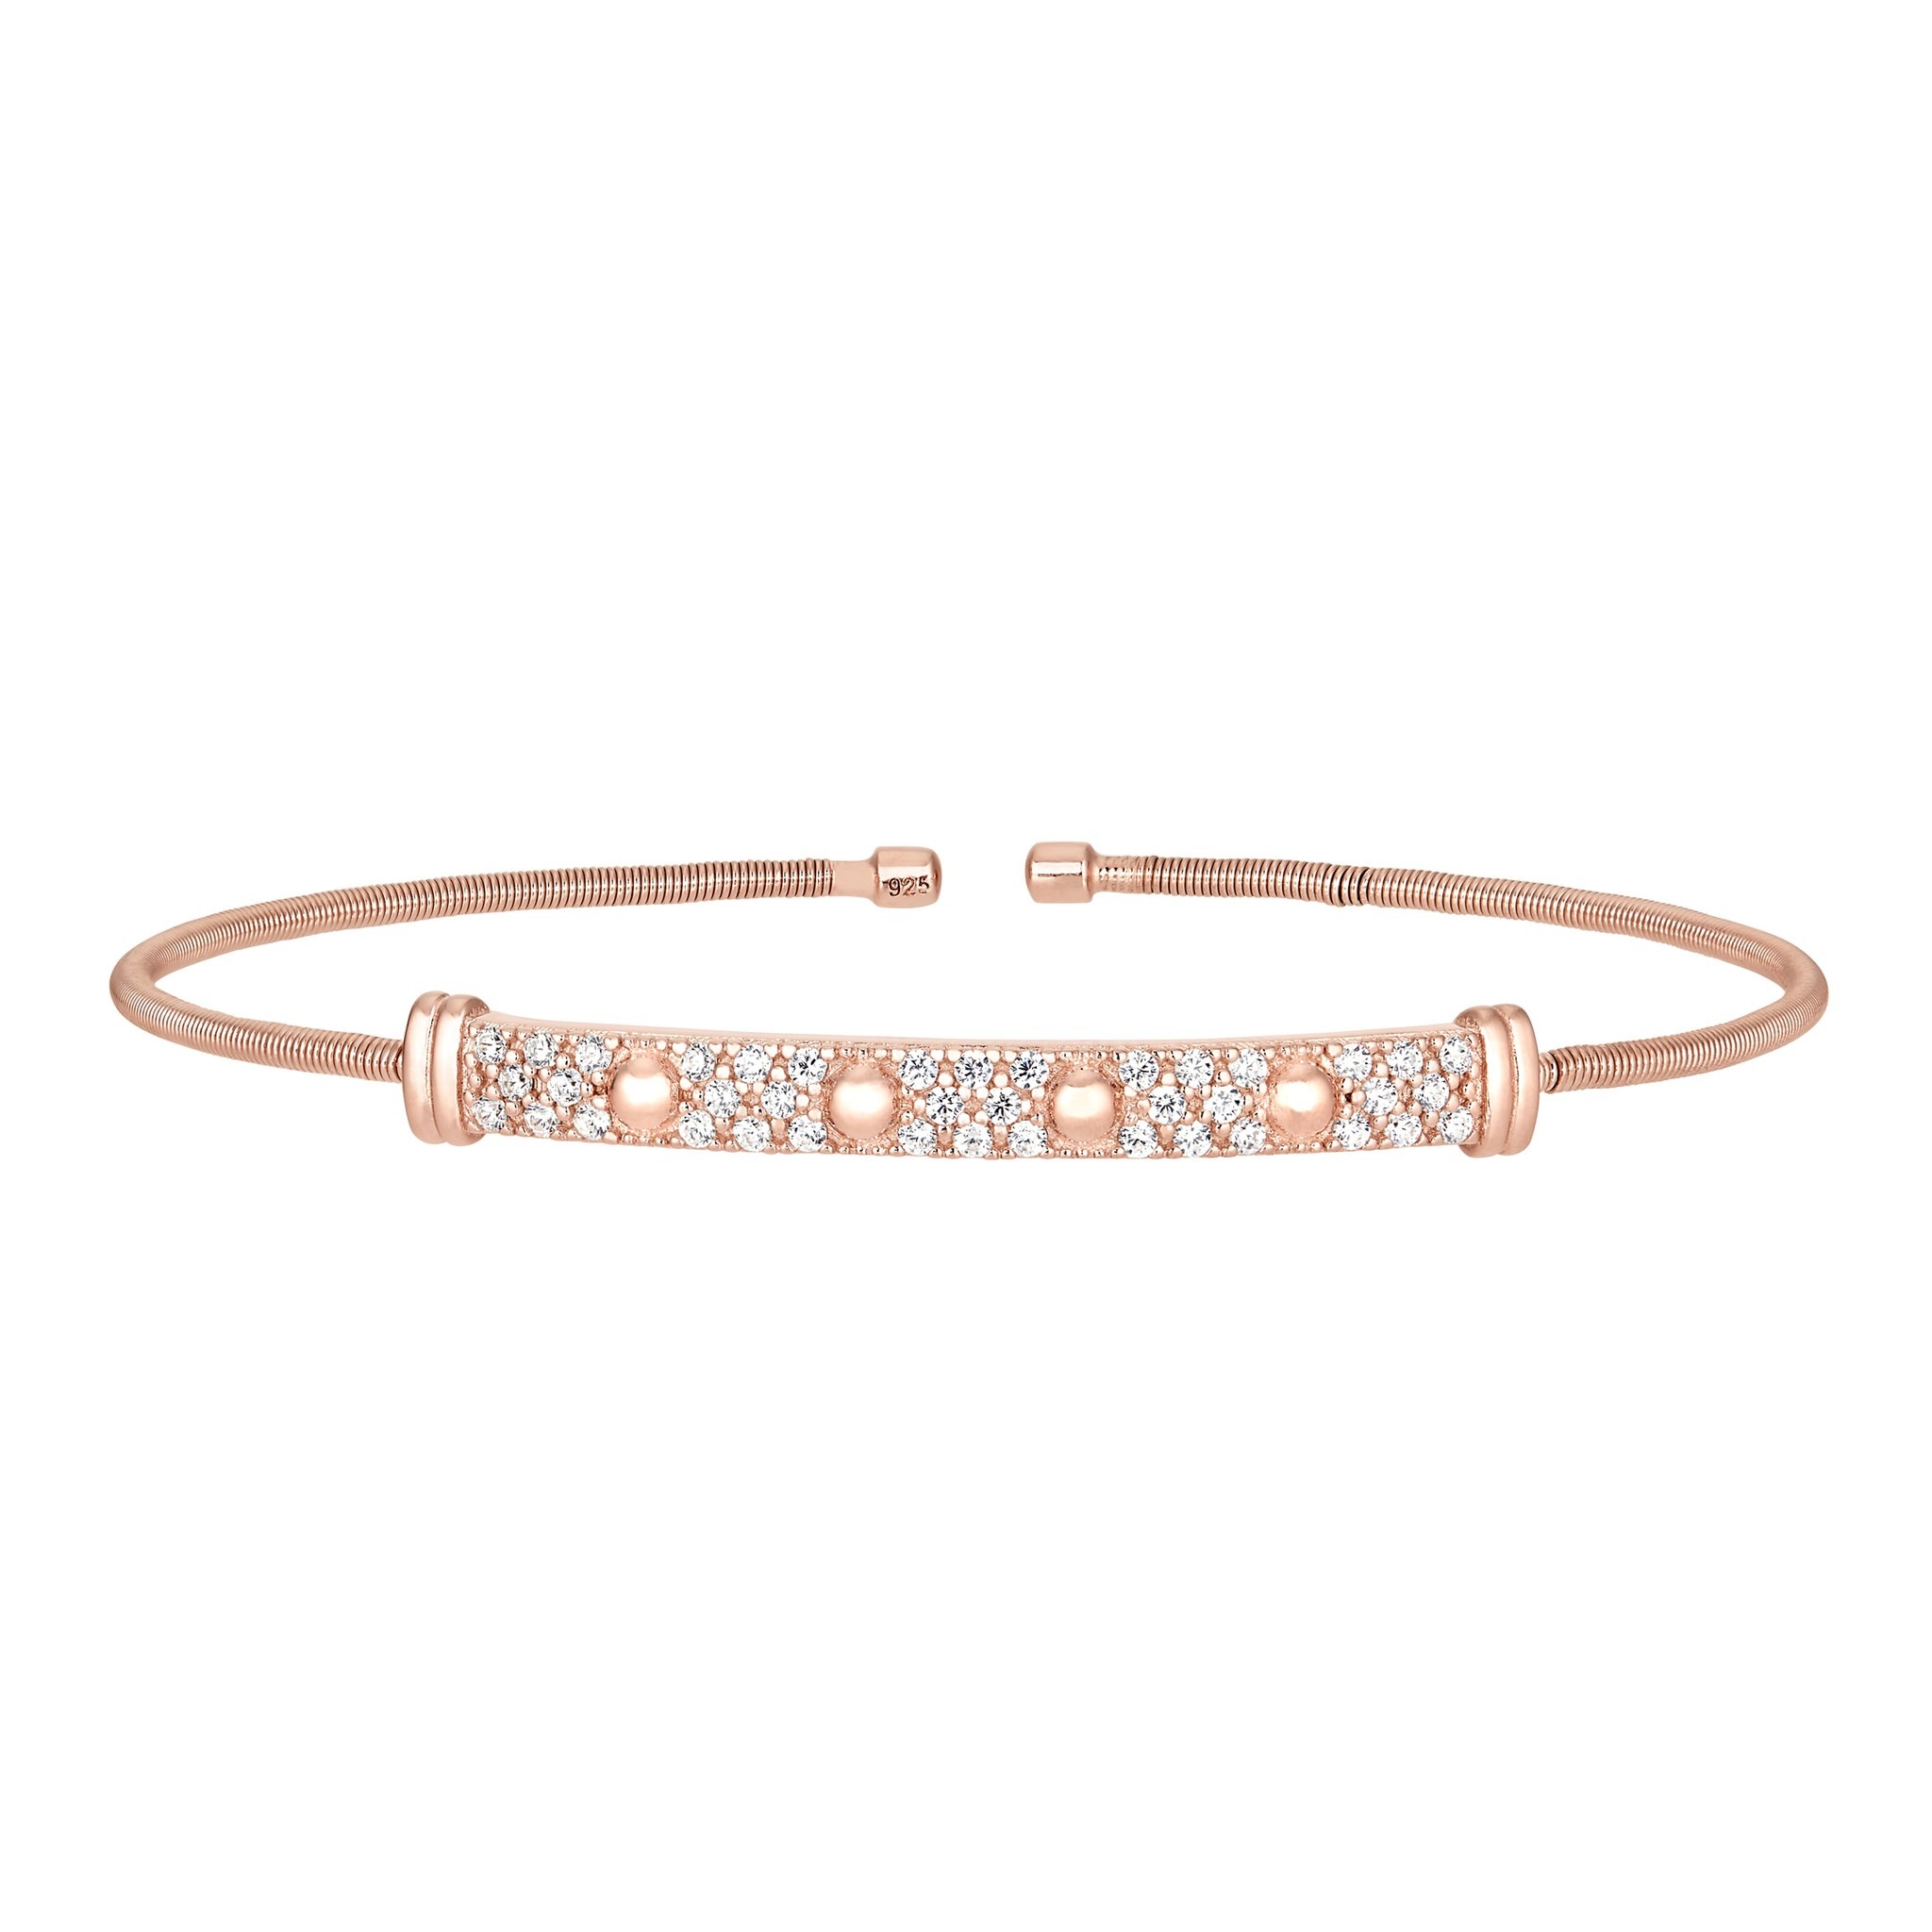 Rose Gold Finish Sterling Silver Cable Cuff Bracelet w/Four Beads & Simulated Diamonds